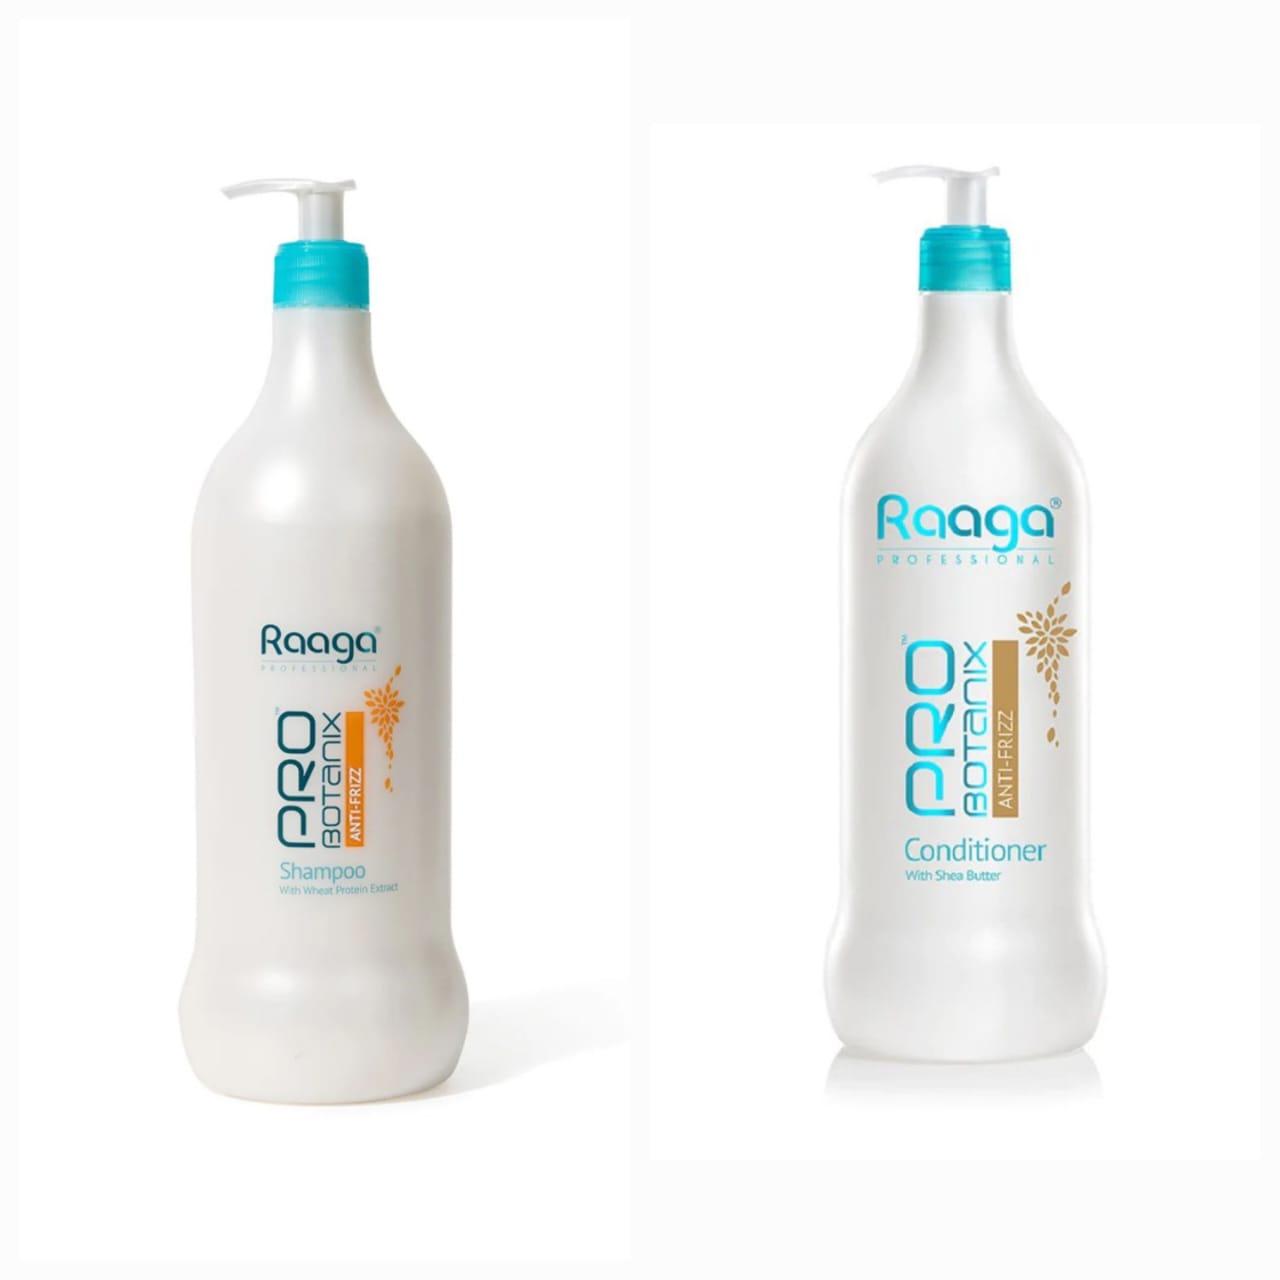 Raaga Professional Pro Botanix Anti-Frizz Shampoo and Conditioner with Shea Butter 1000ml Each